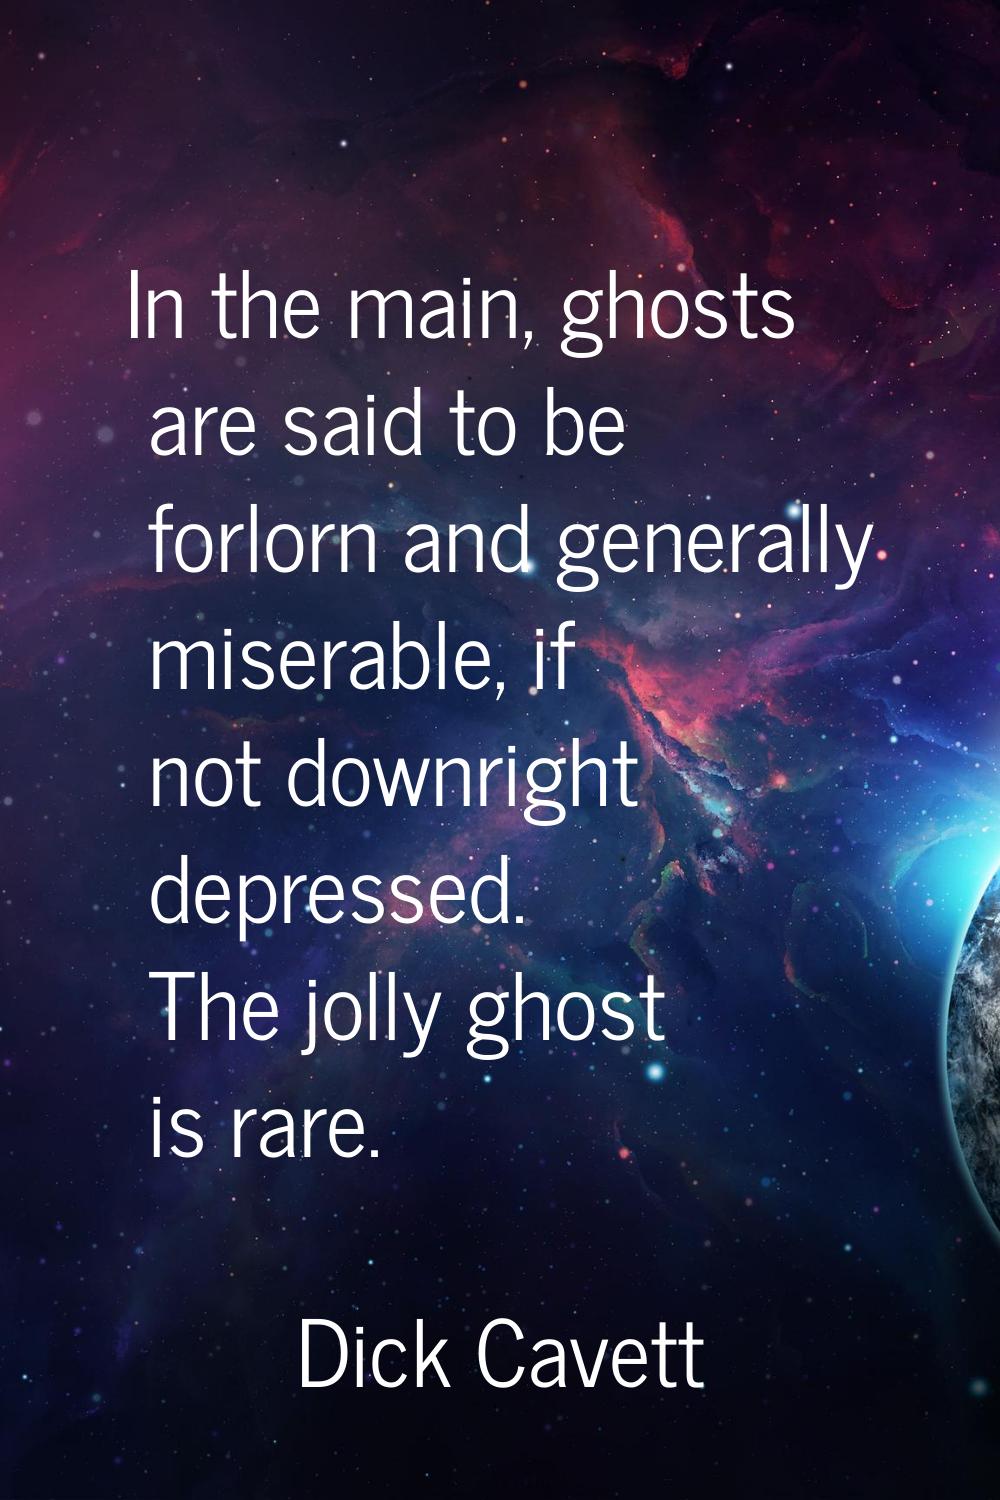 In the main, ghosts are said to be forlorn and generally miserable, if not downright depressed. The